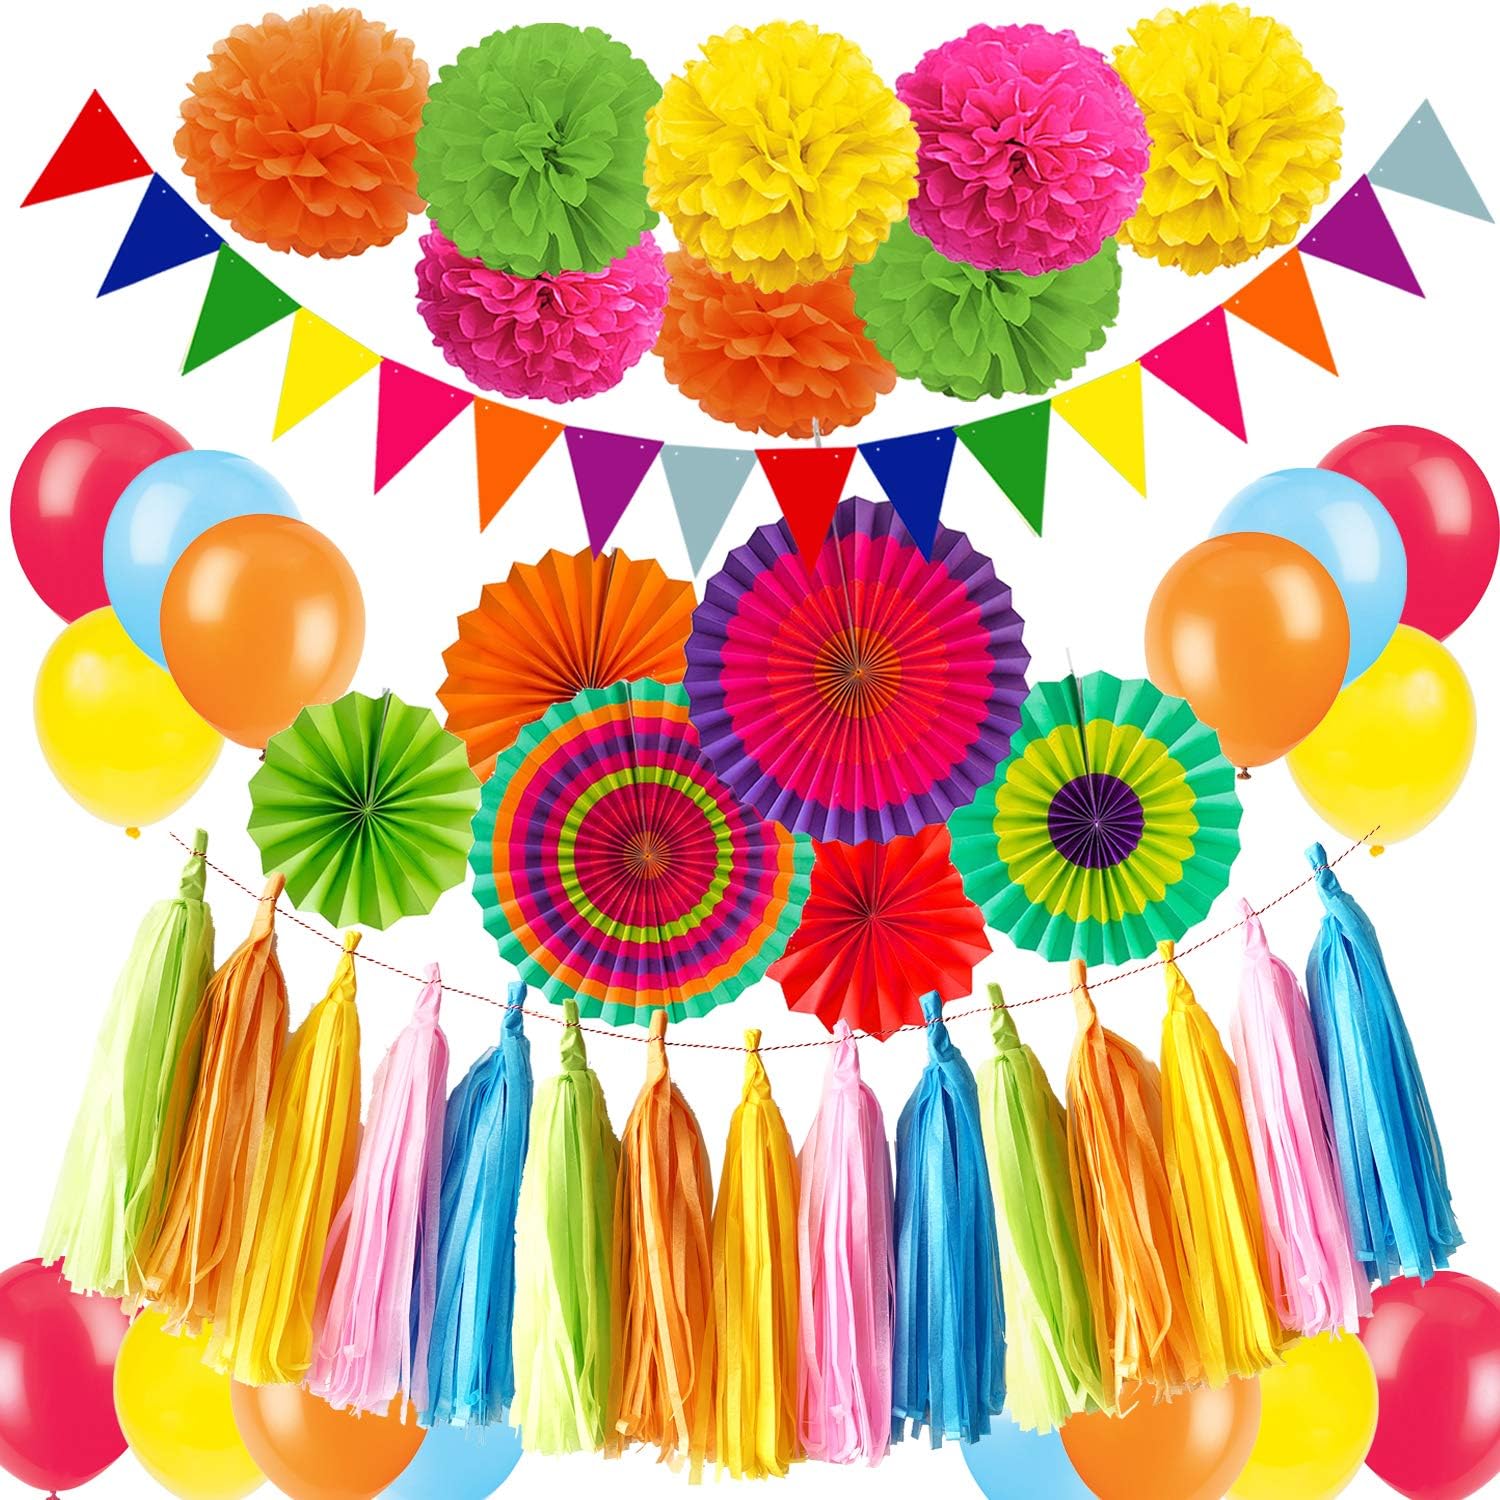 ZERODECO Holi Decorations, Multicolor Vibrant Hanging Paper Fans Pompoms Latex Balloon Tissue Paper Tassel Triangle Bunting Banner for Fiesta Mexican Cinco De Mayo Holi Decorations